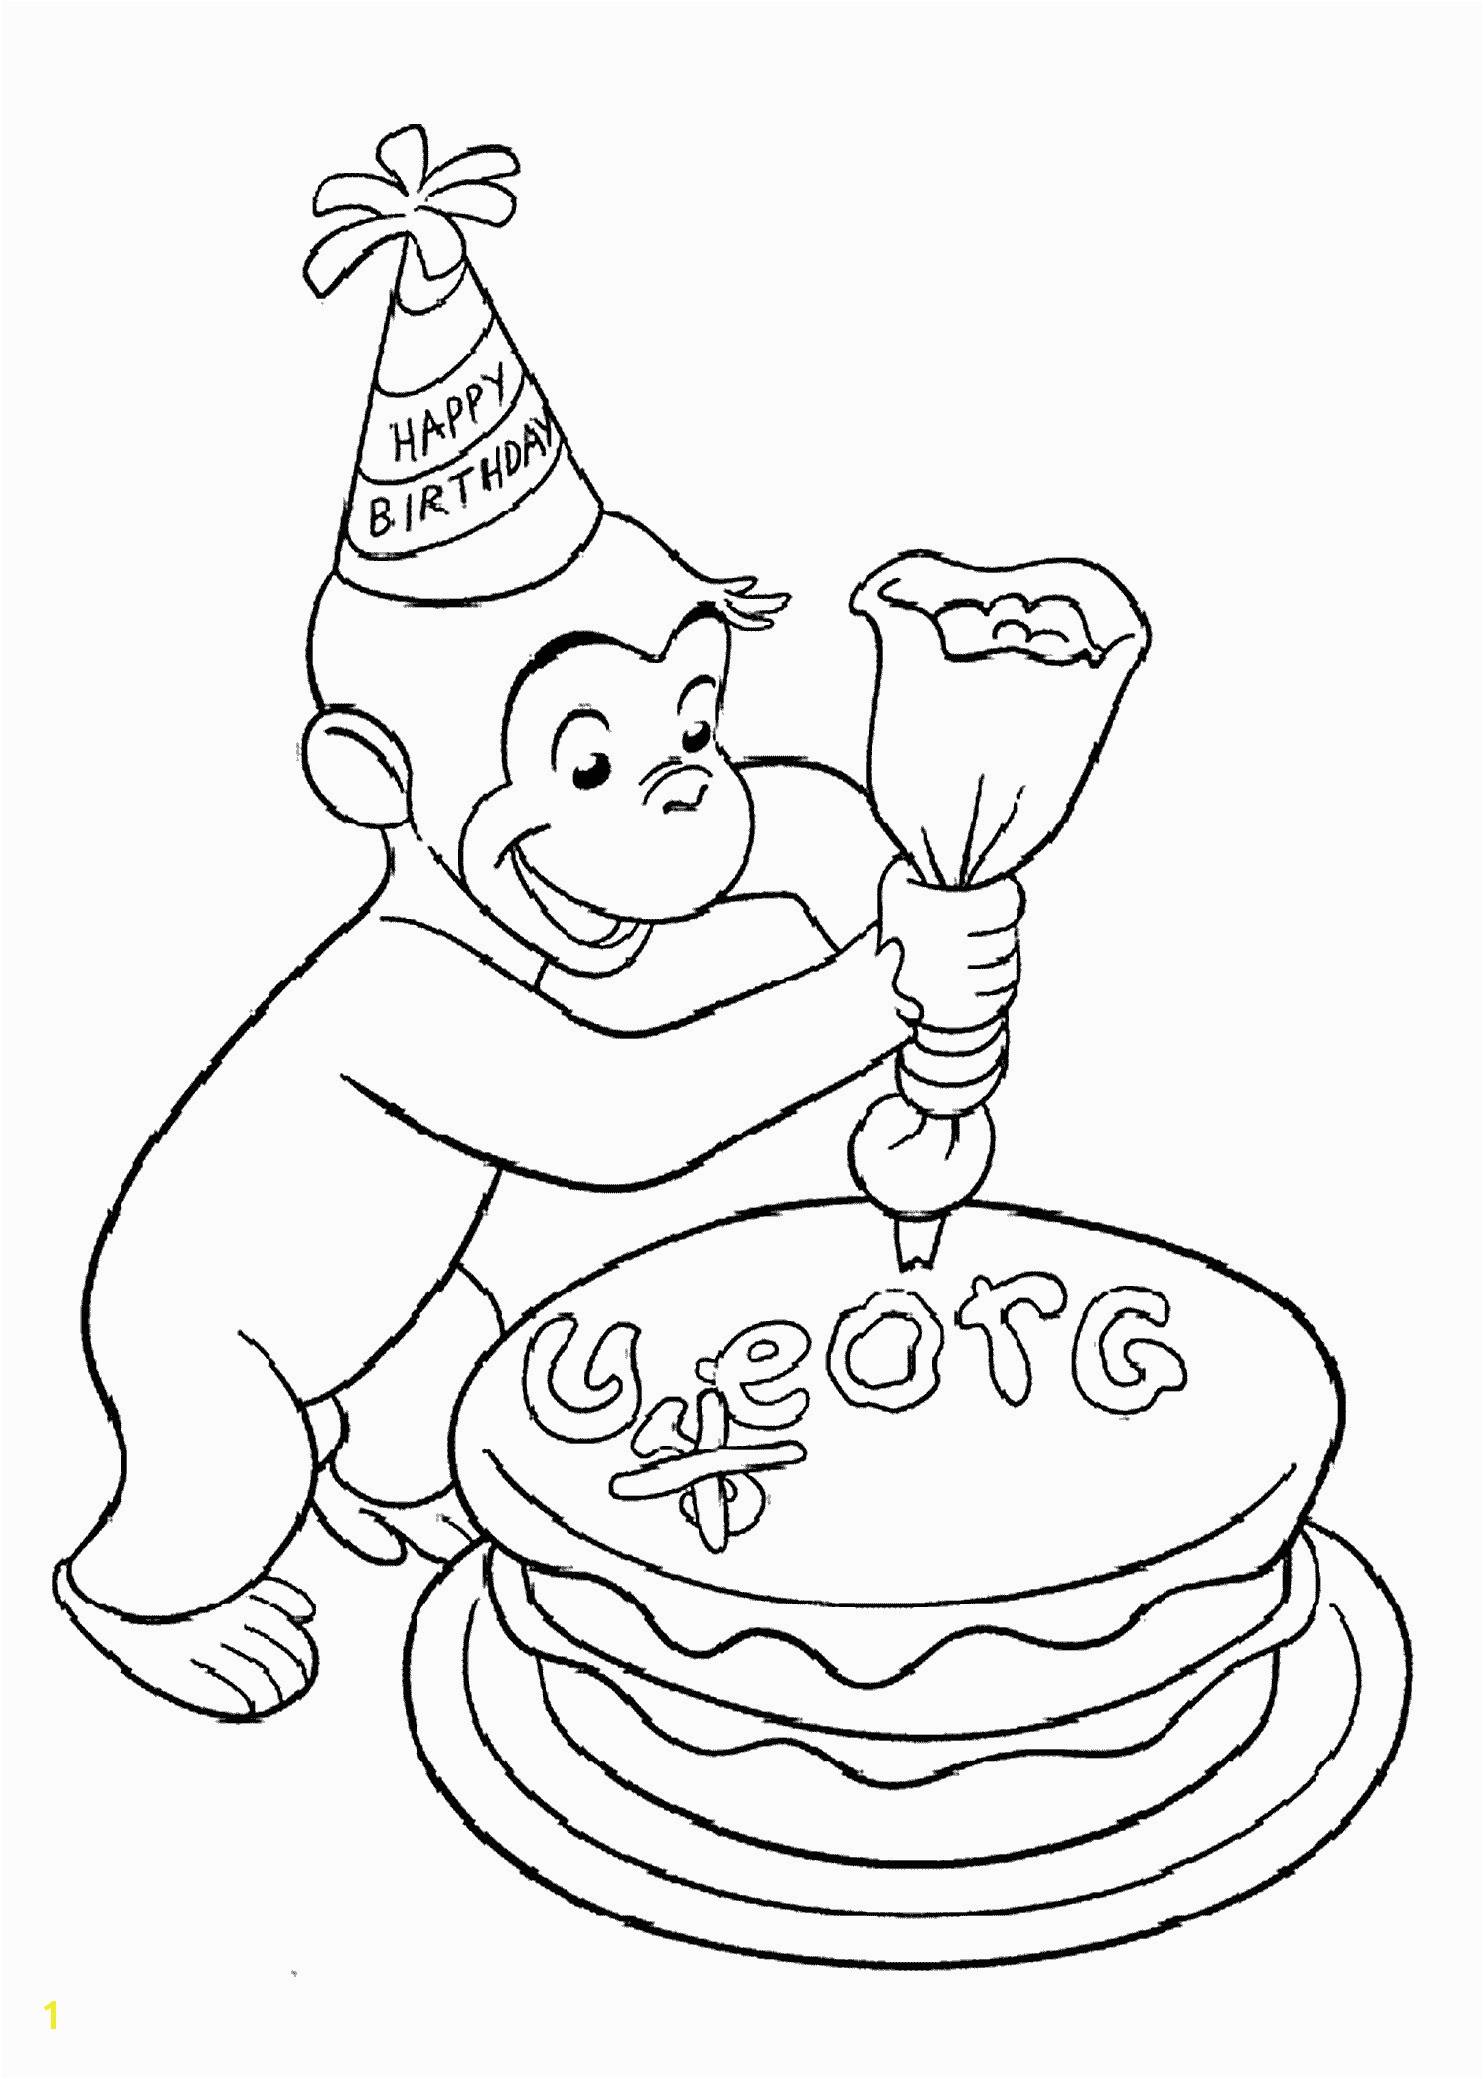 Curious George Printables Coloring Pages Curious George Coloring Pages Curious George Free Coloring Pages